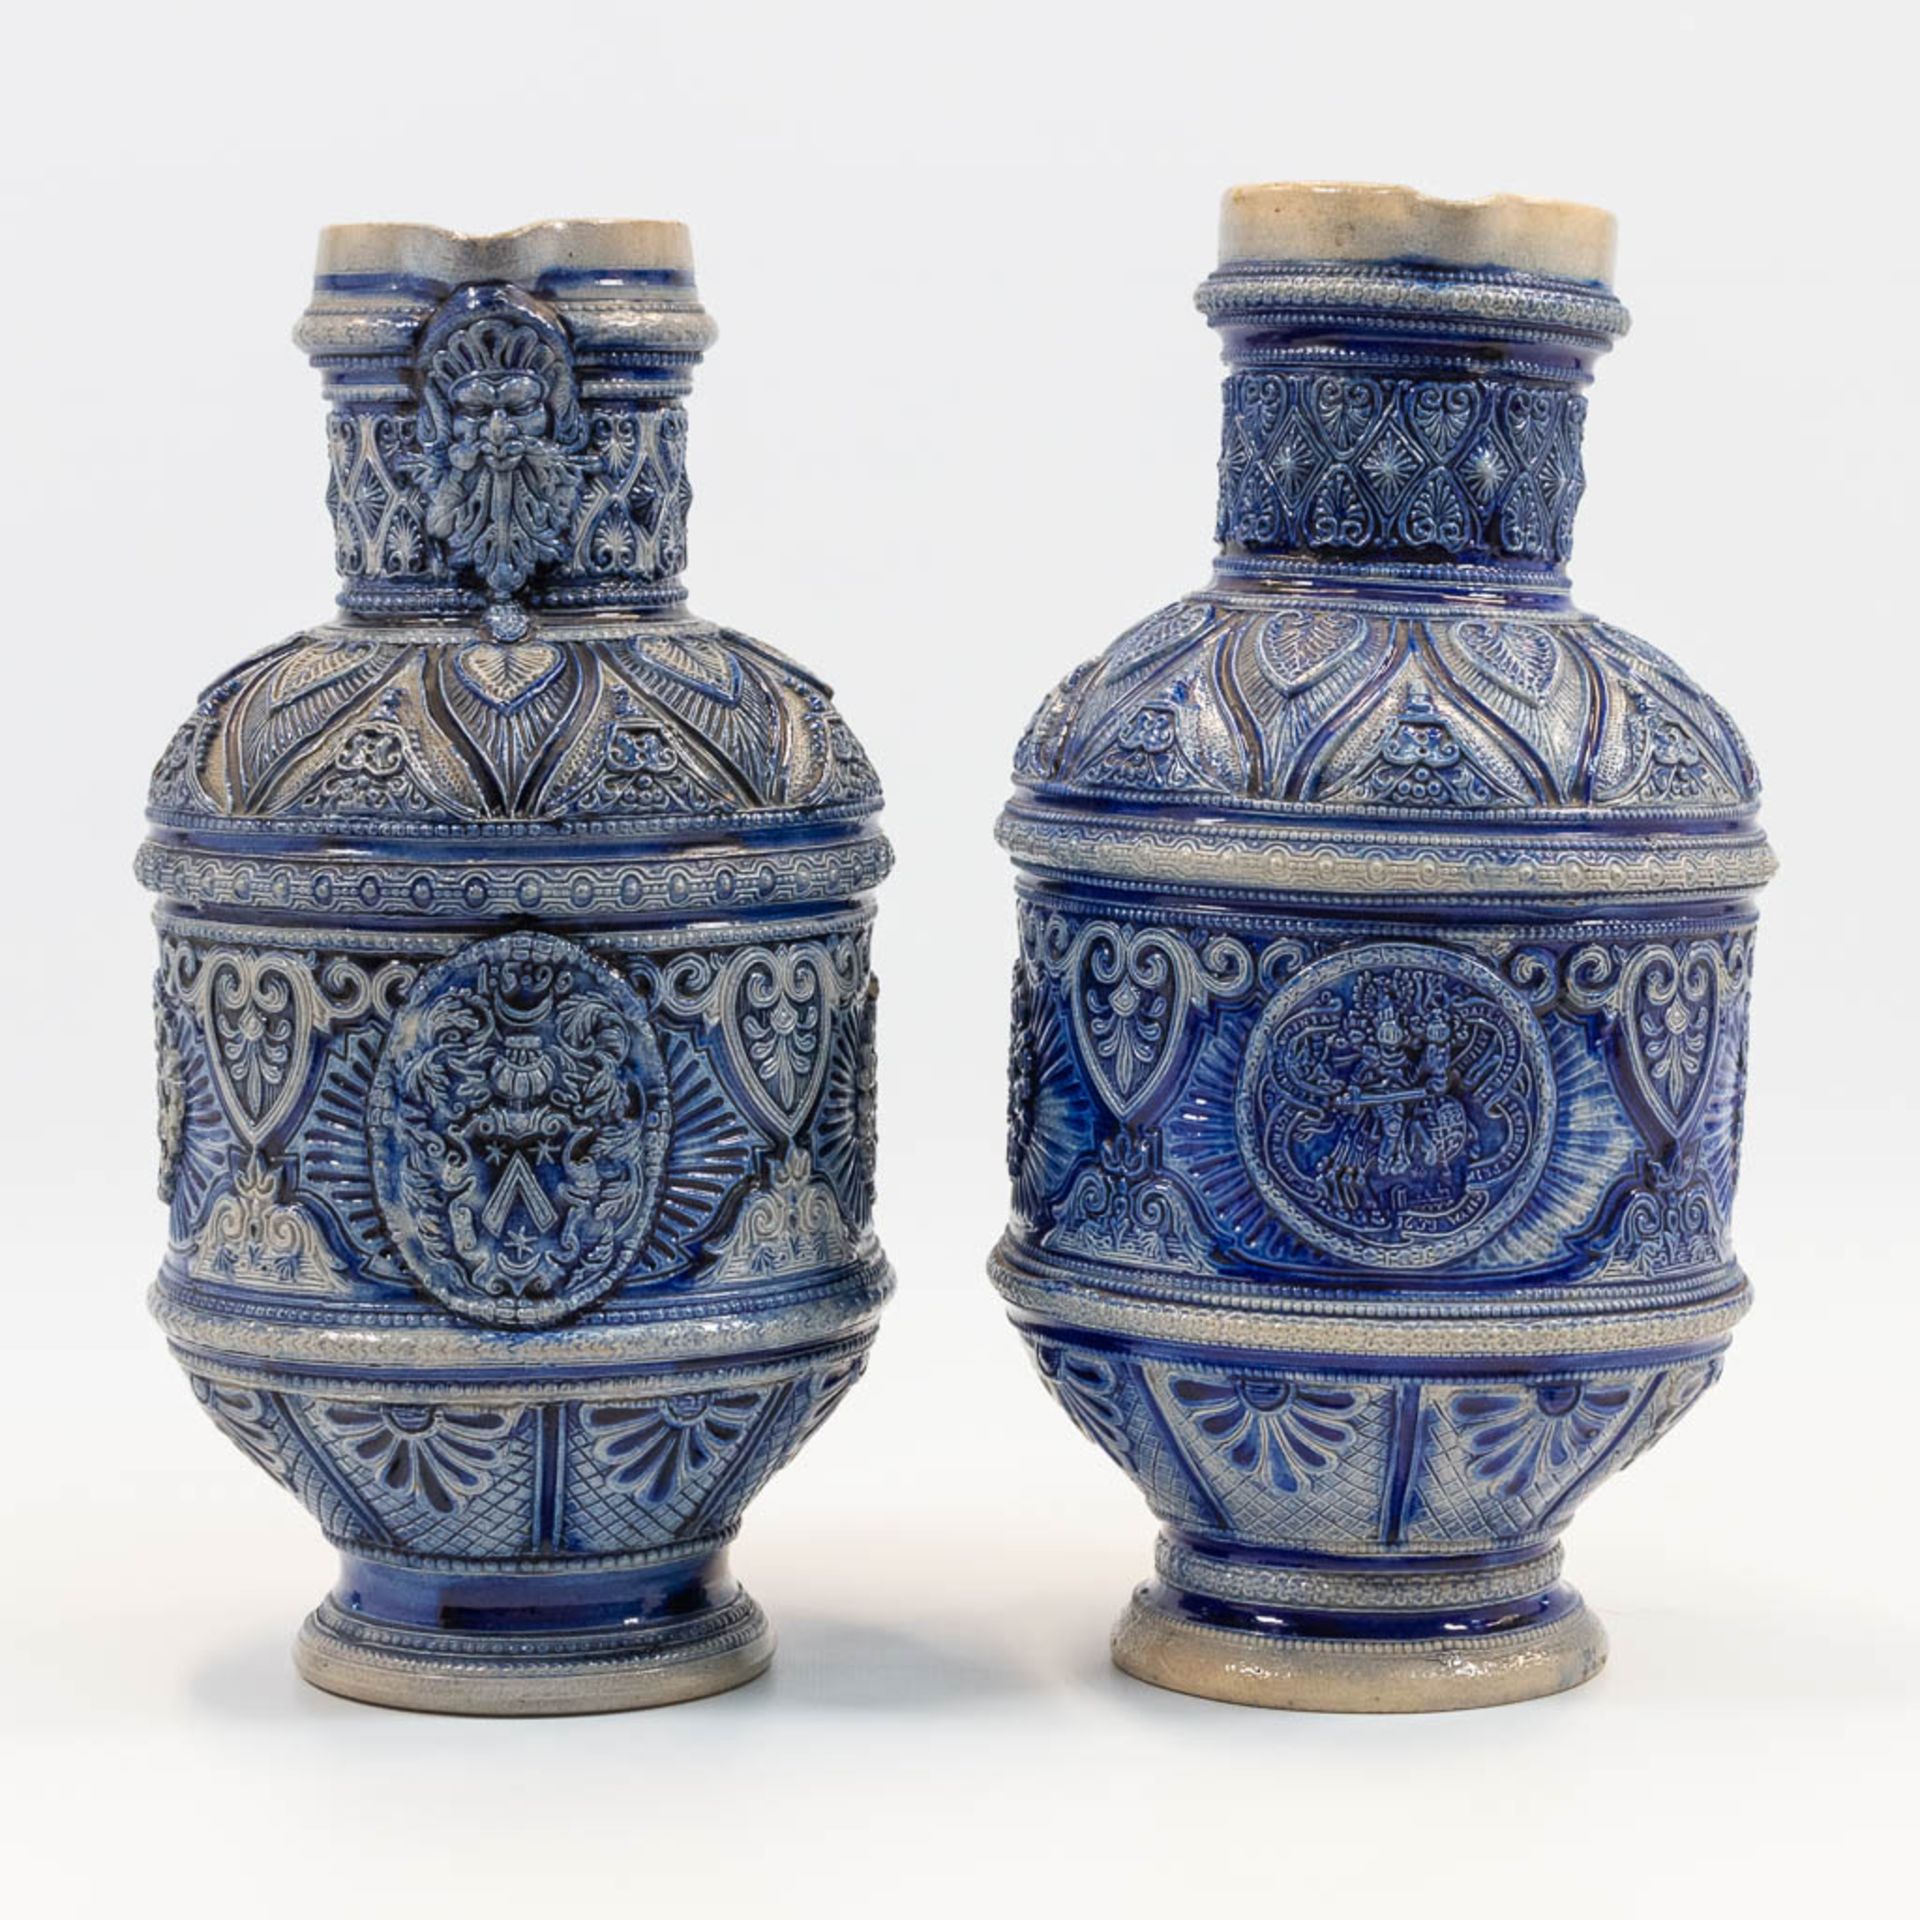 A collection of 2 Westerwald Pitchers with blue glaze, of which one has a Bartmann. (32 x 18 cm) - Image 4 of 14